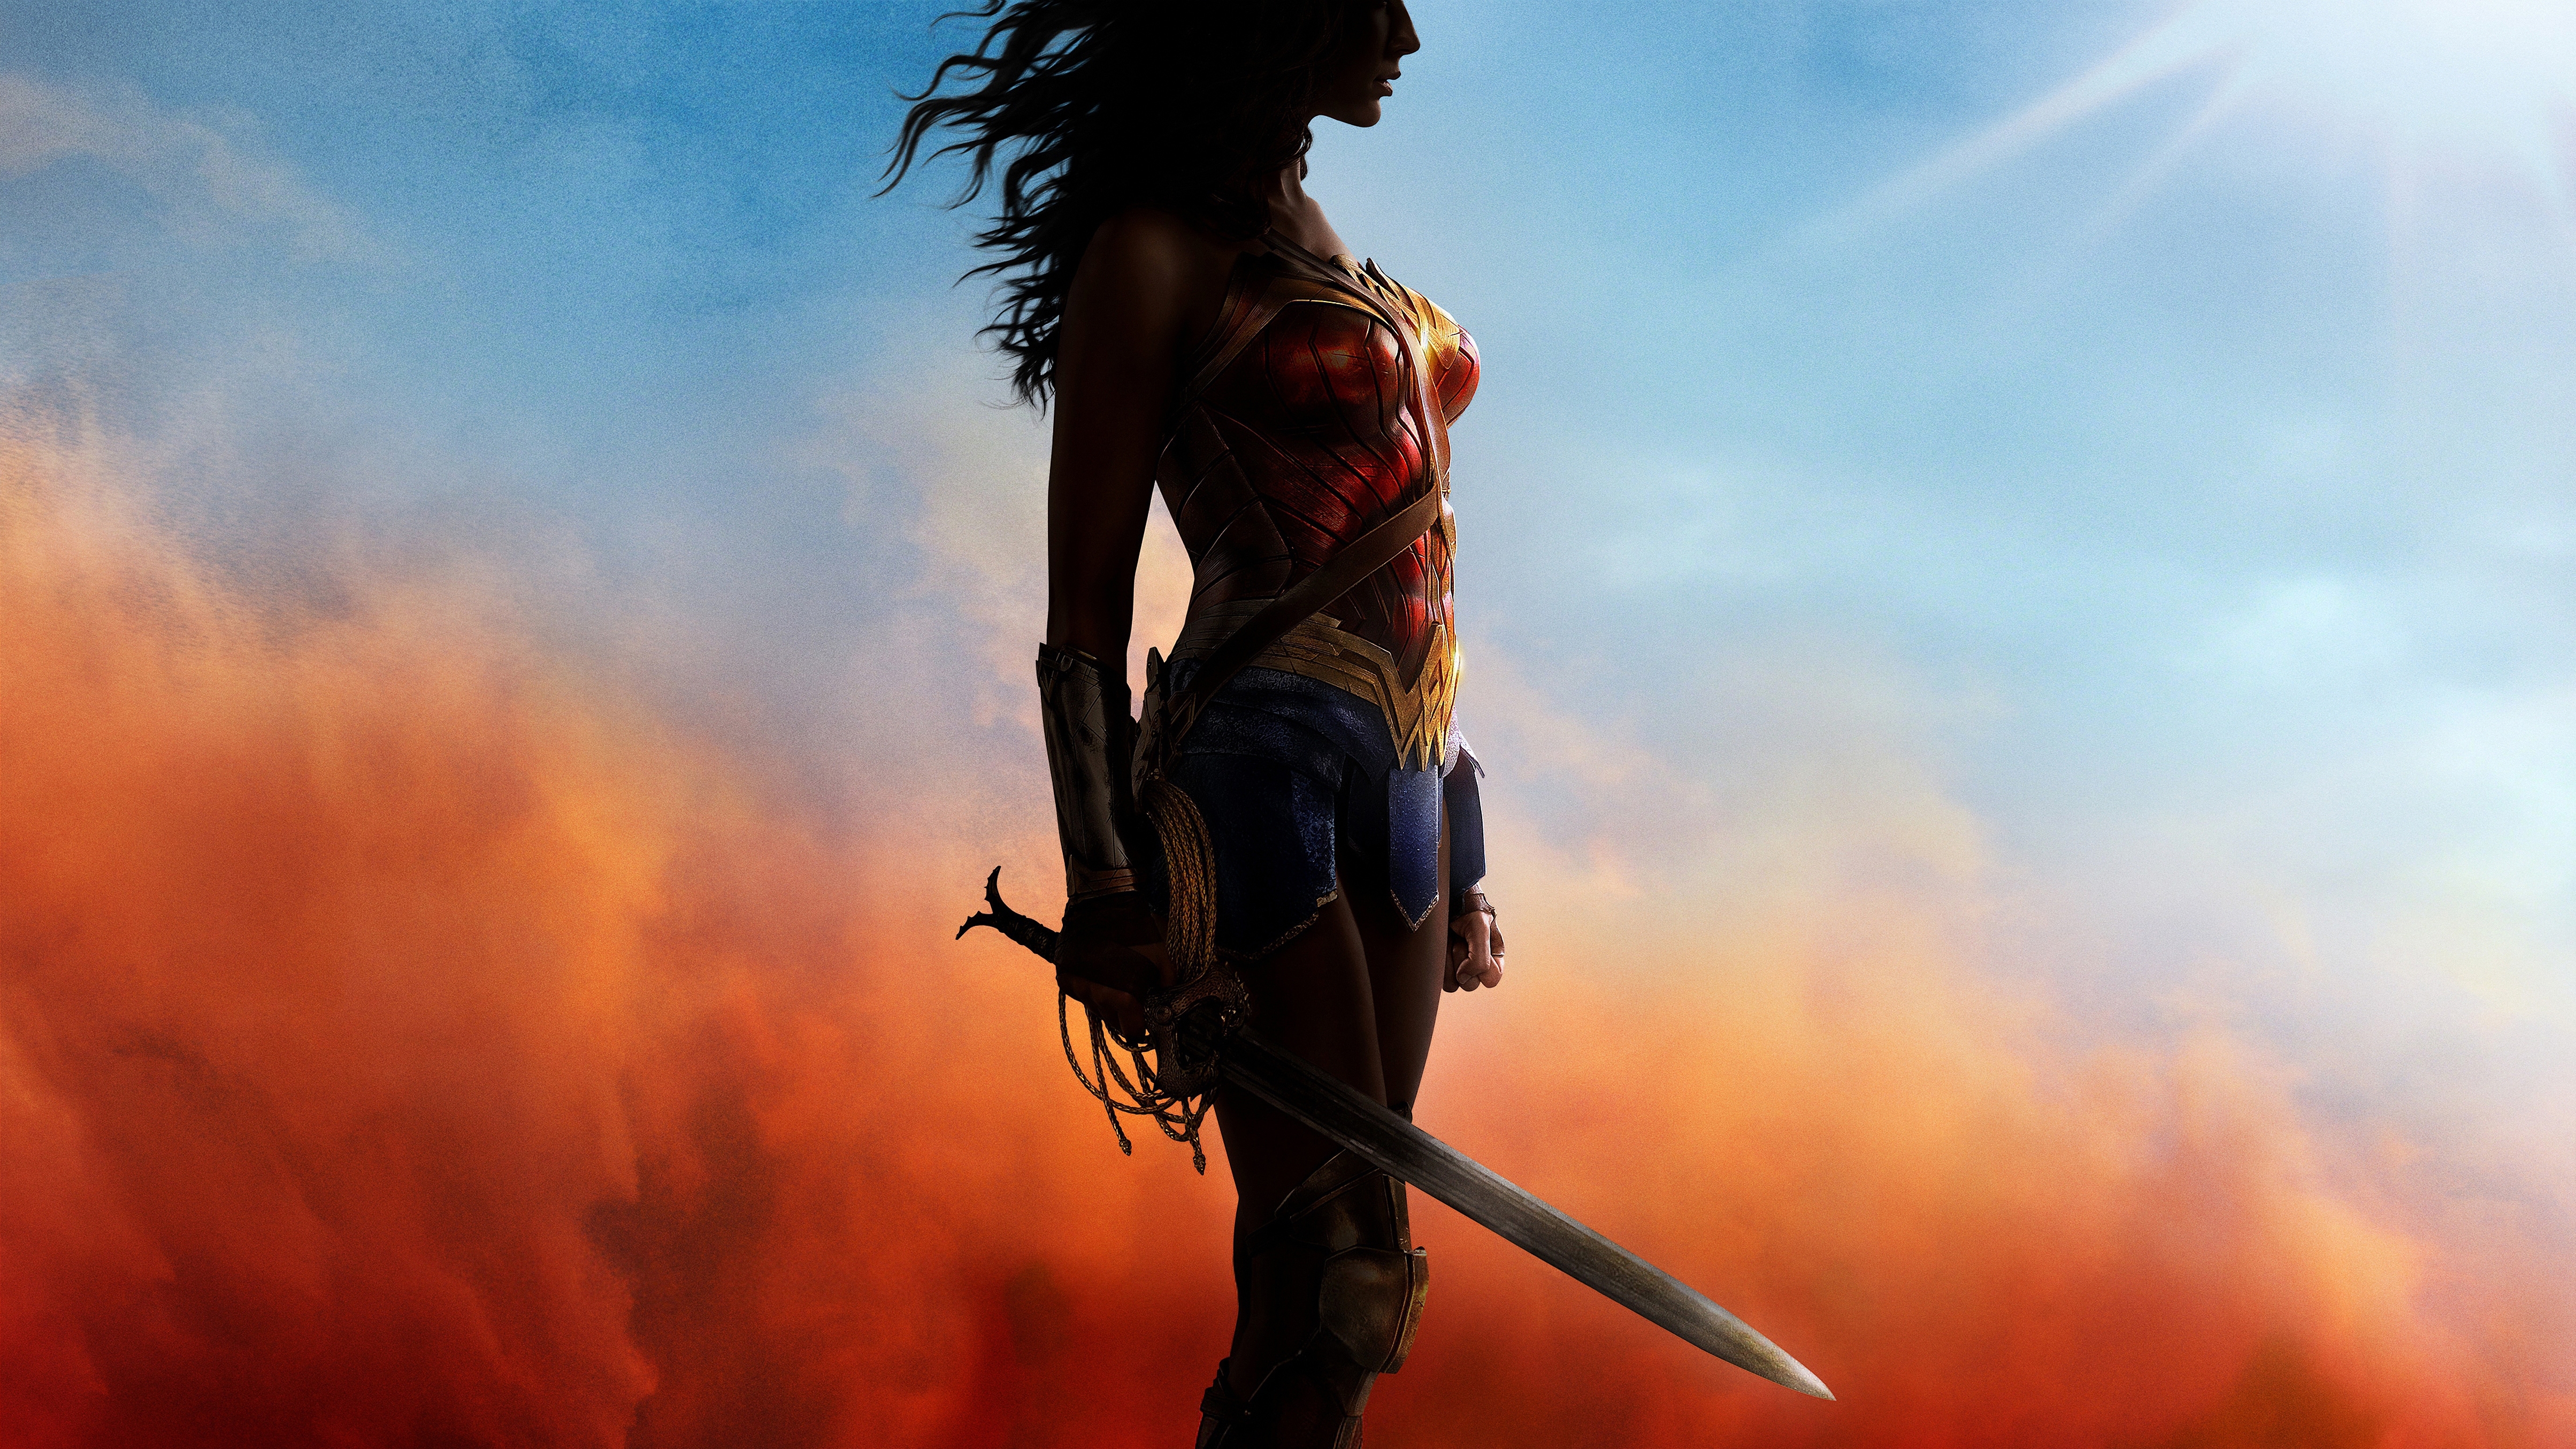 10 Top Wonder Woman Computer Wallpaper FULL HD 1920×1080 For PC Background